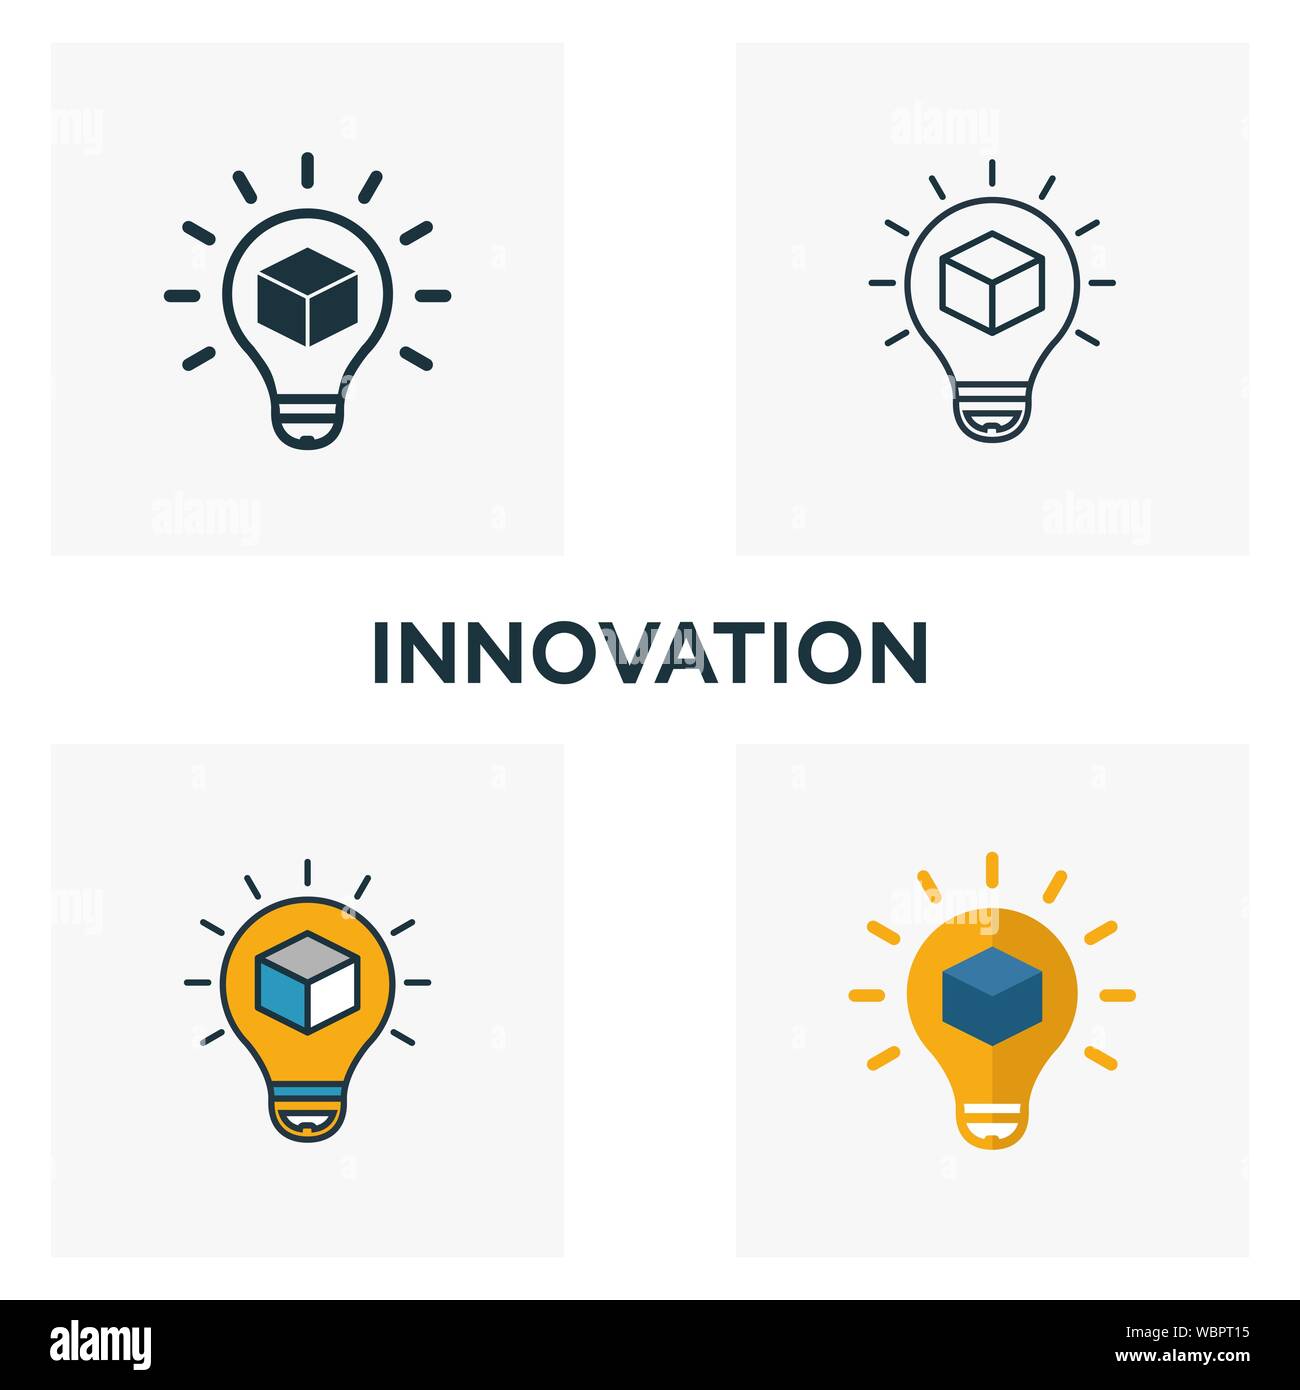 Innovation icon set. Four elements in diferent styles from blockchain icons collection. Creative innovation icons filled, outline, colored and flat Stock Vector